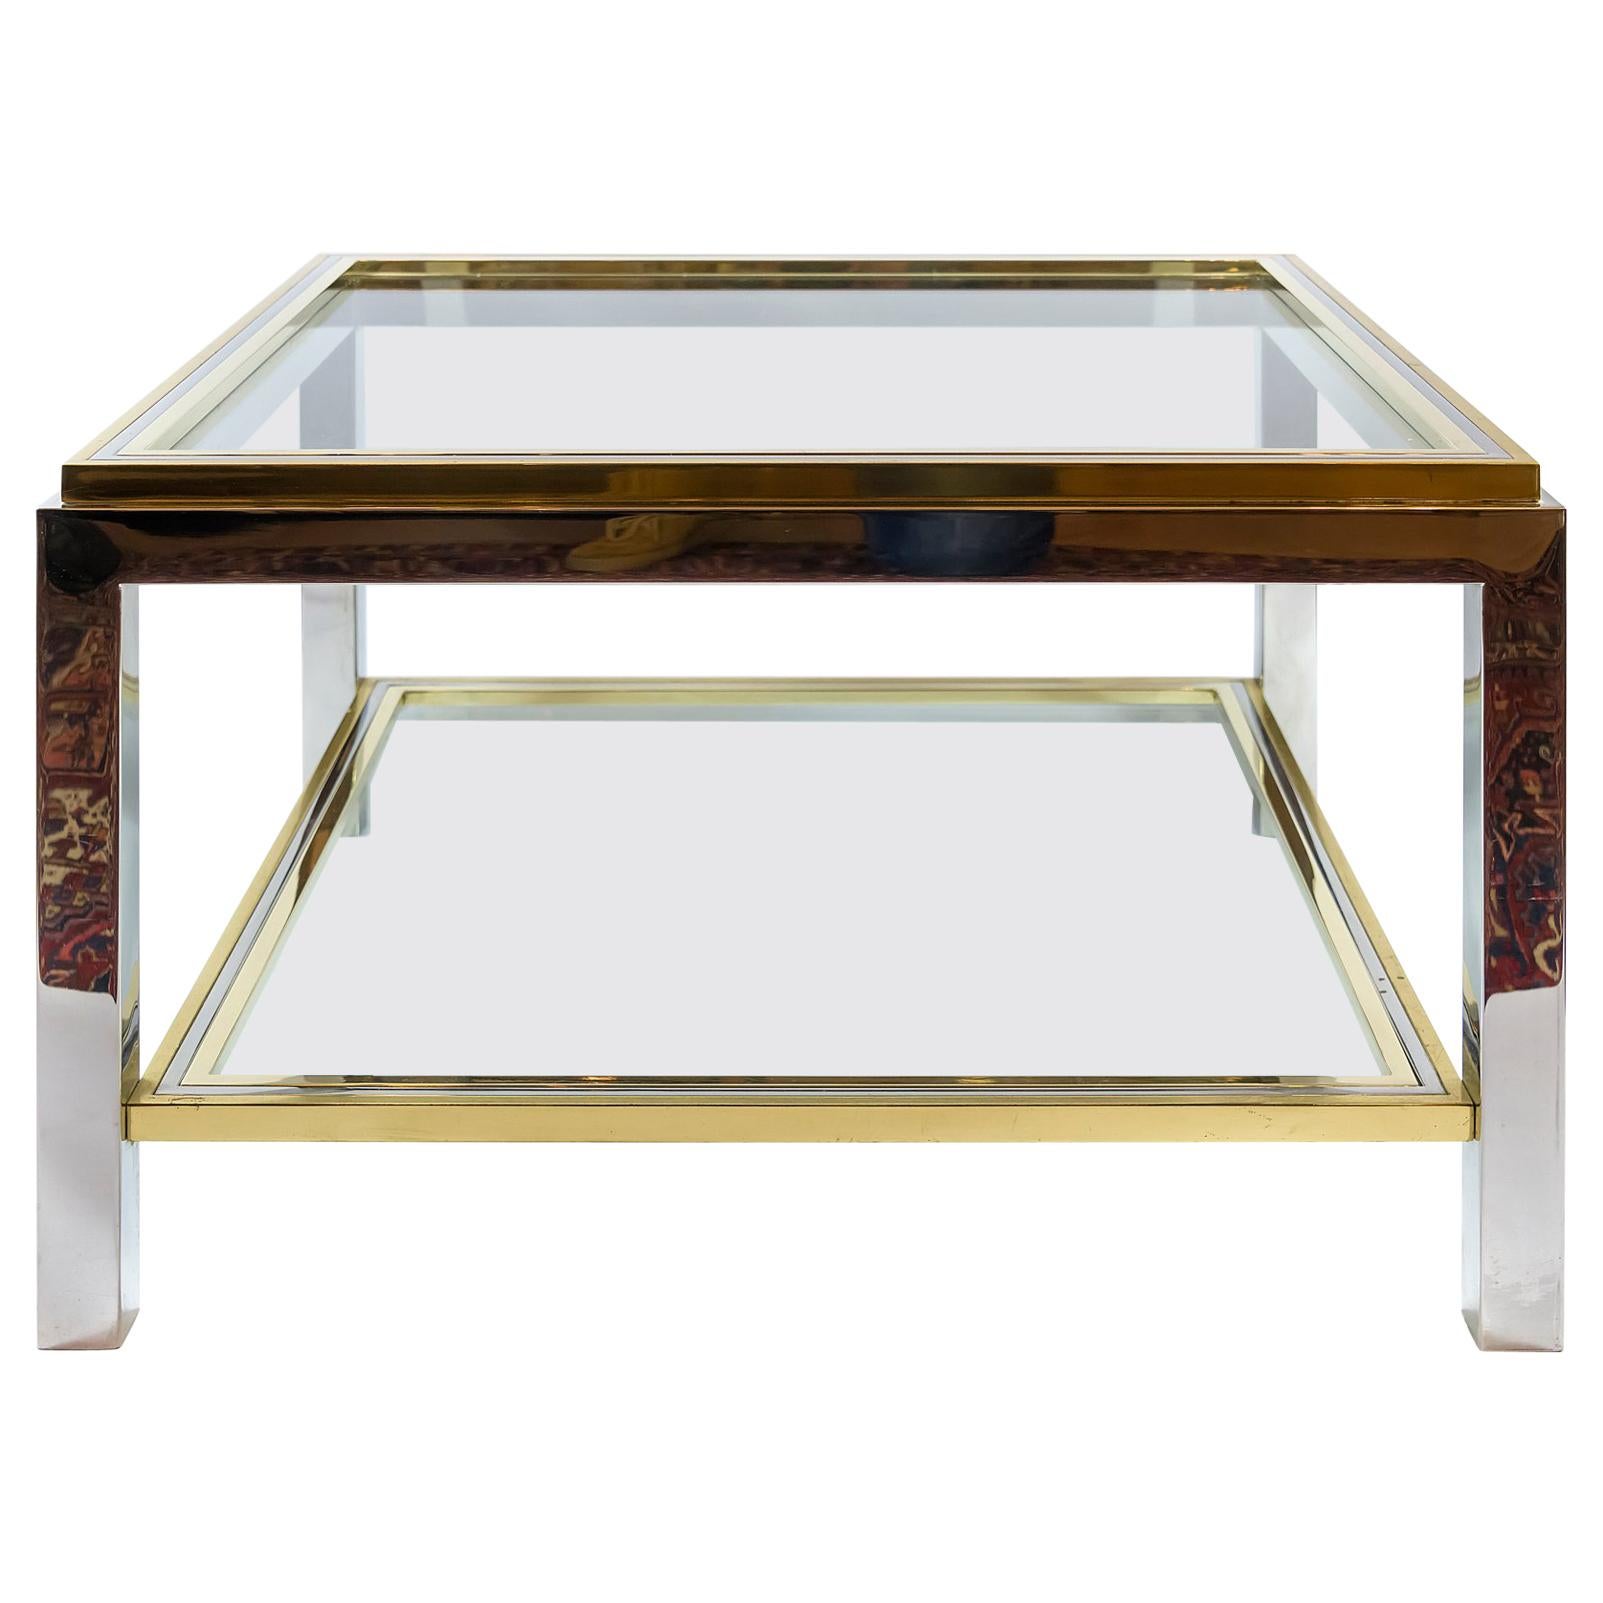 Italian Midcentury Brass, Chrome and Glass Coffee Table, Willy Rizzo, circa 1960